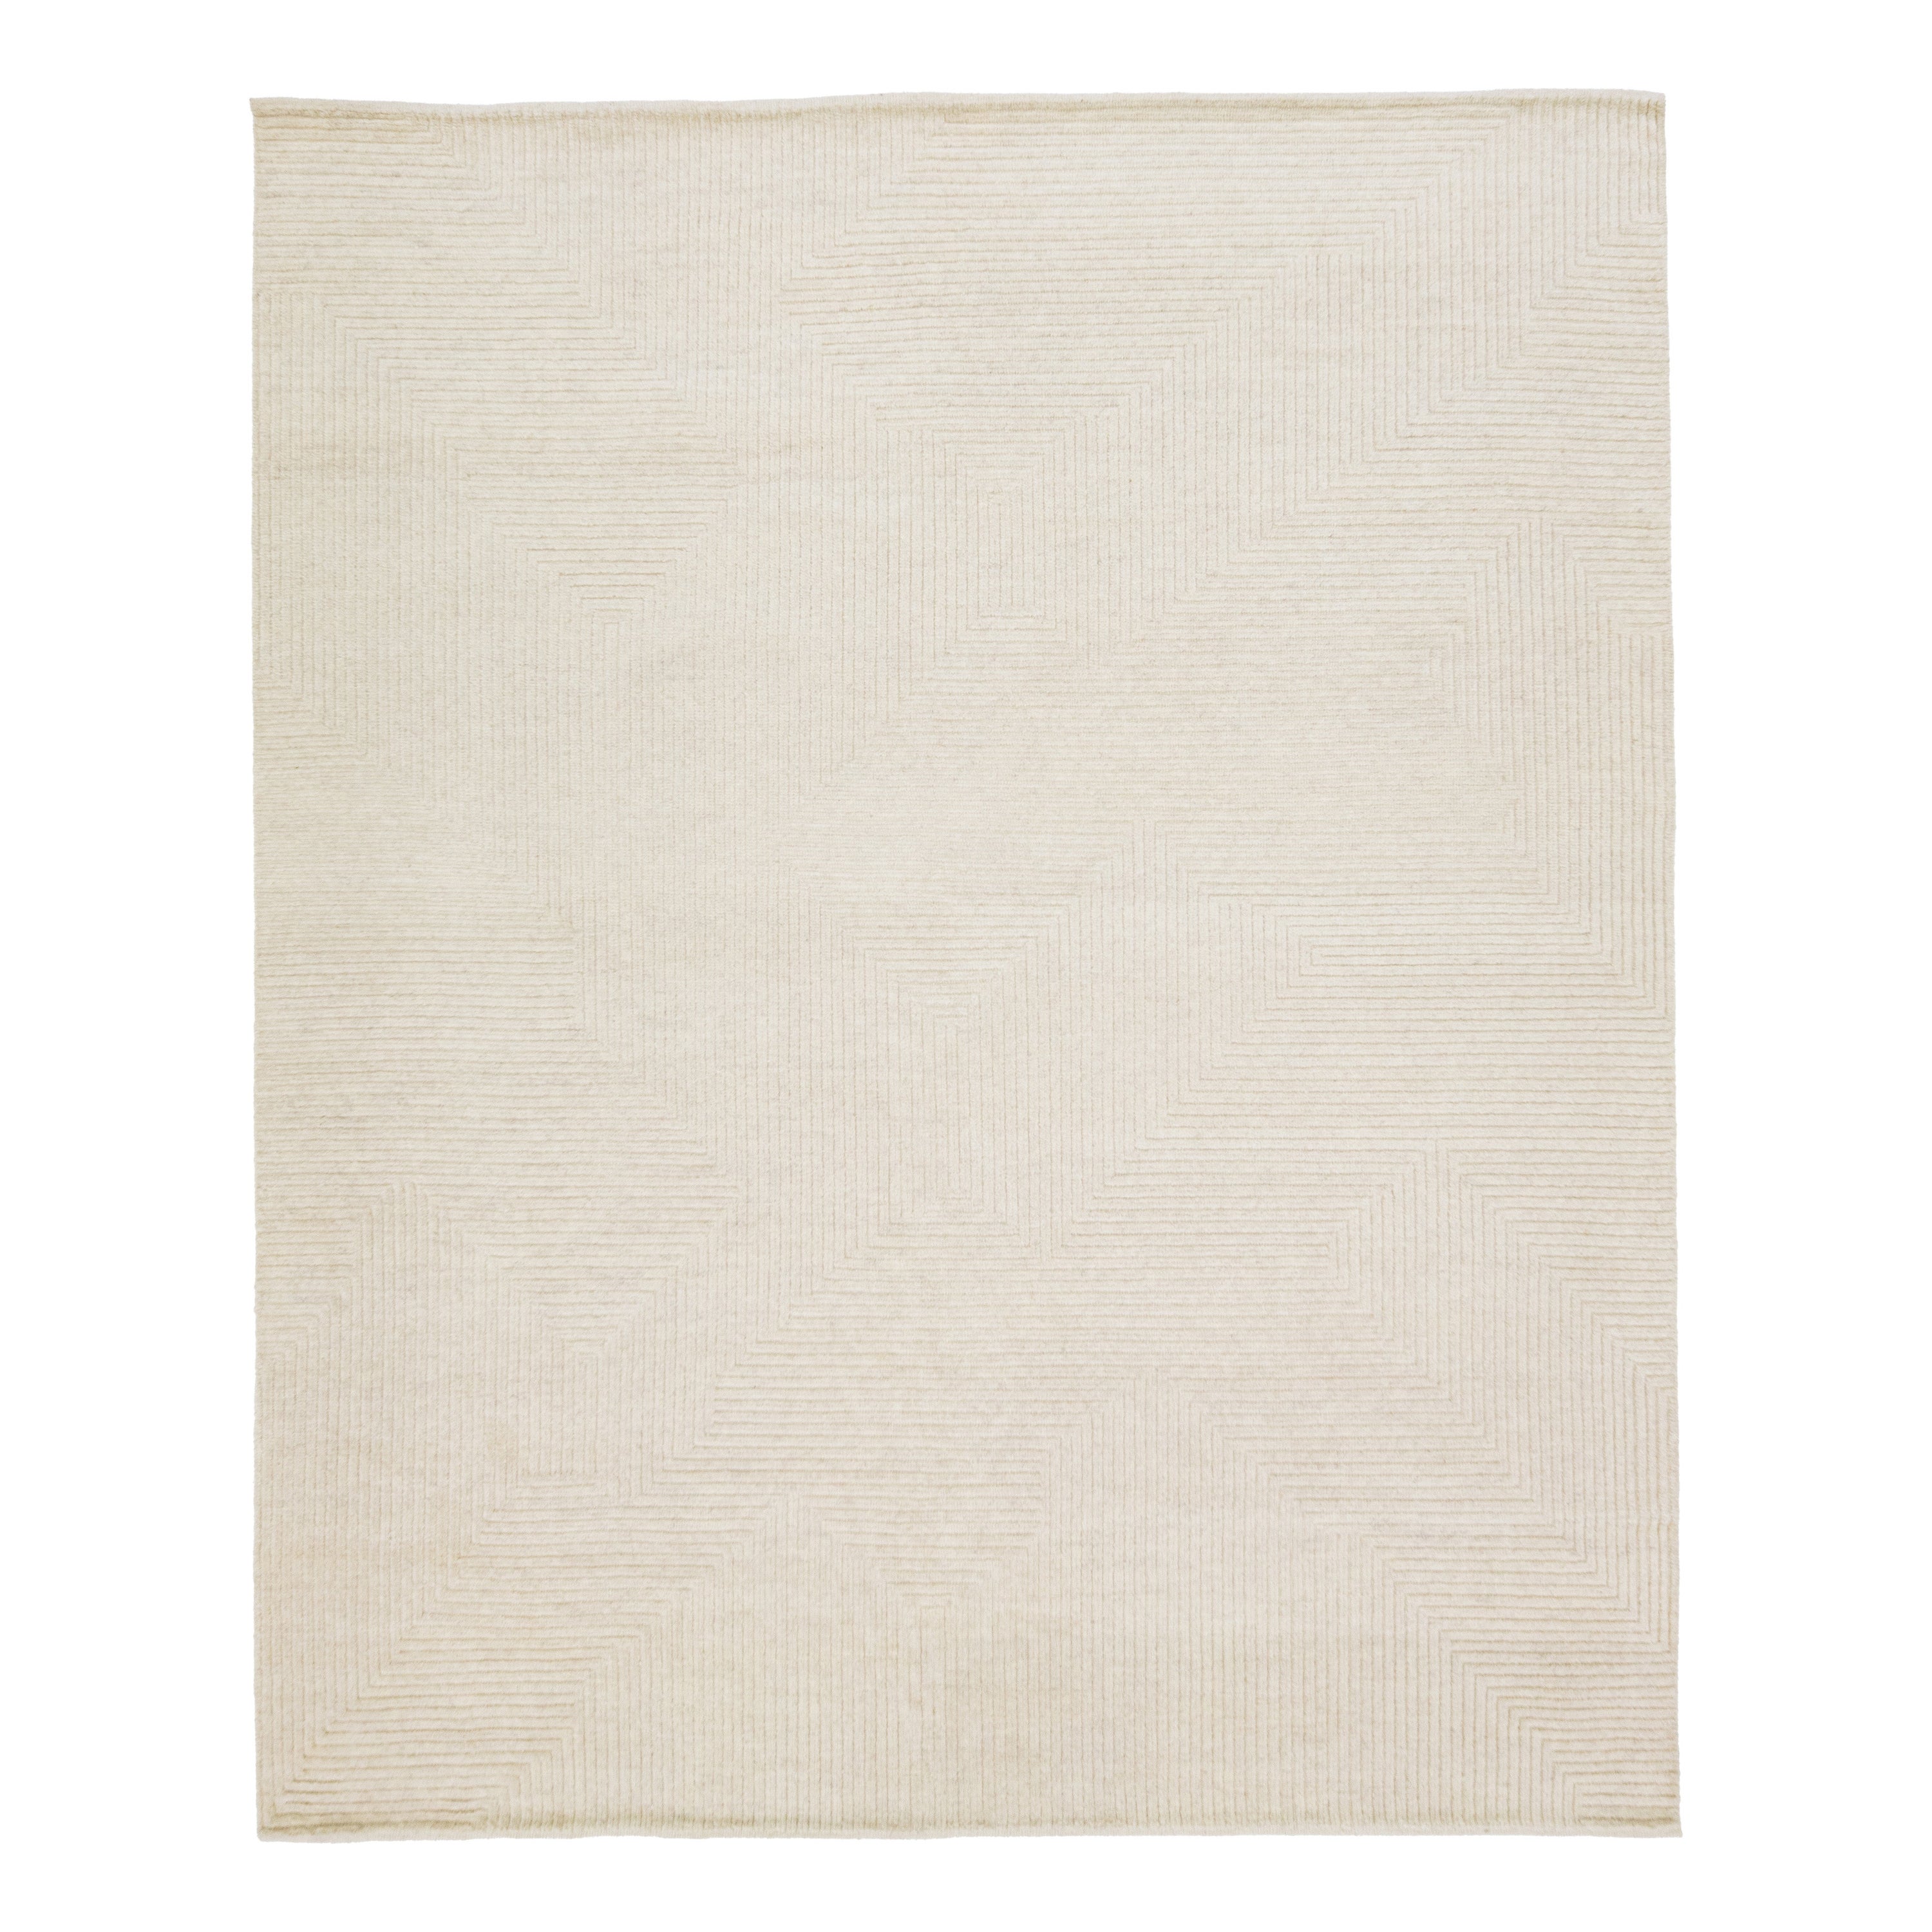 Handmade Moroccan Style Beige Wool Rug With Minimalist Design For Sale